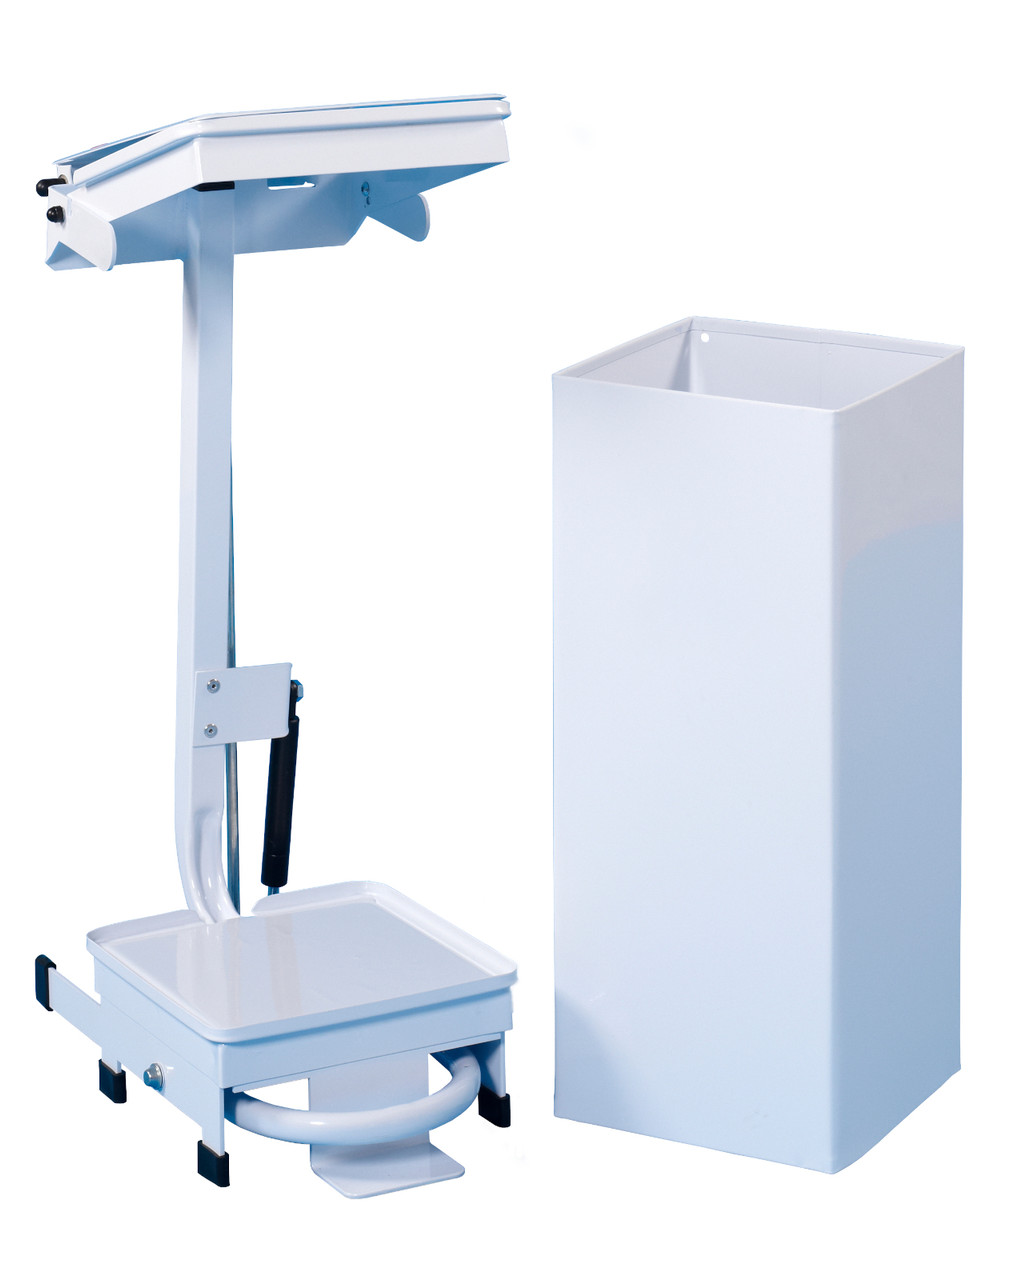 HFRB20 - Linton Removable Body Sackholder - NHS approved rubbish bin with removable body for multipurpose use